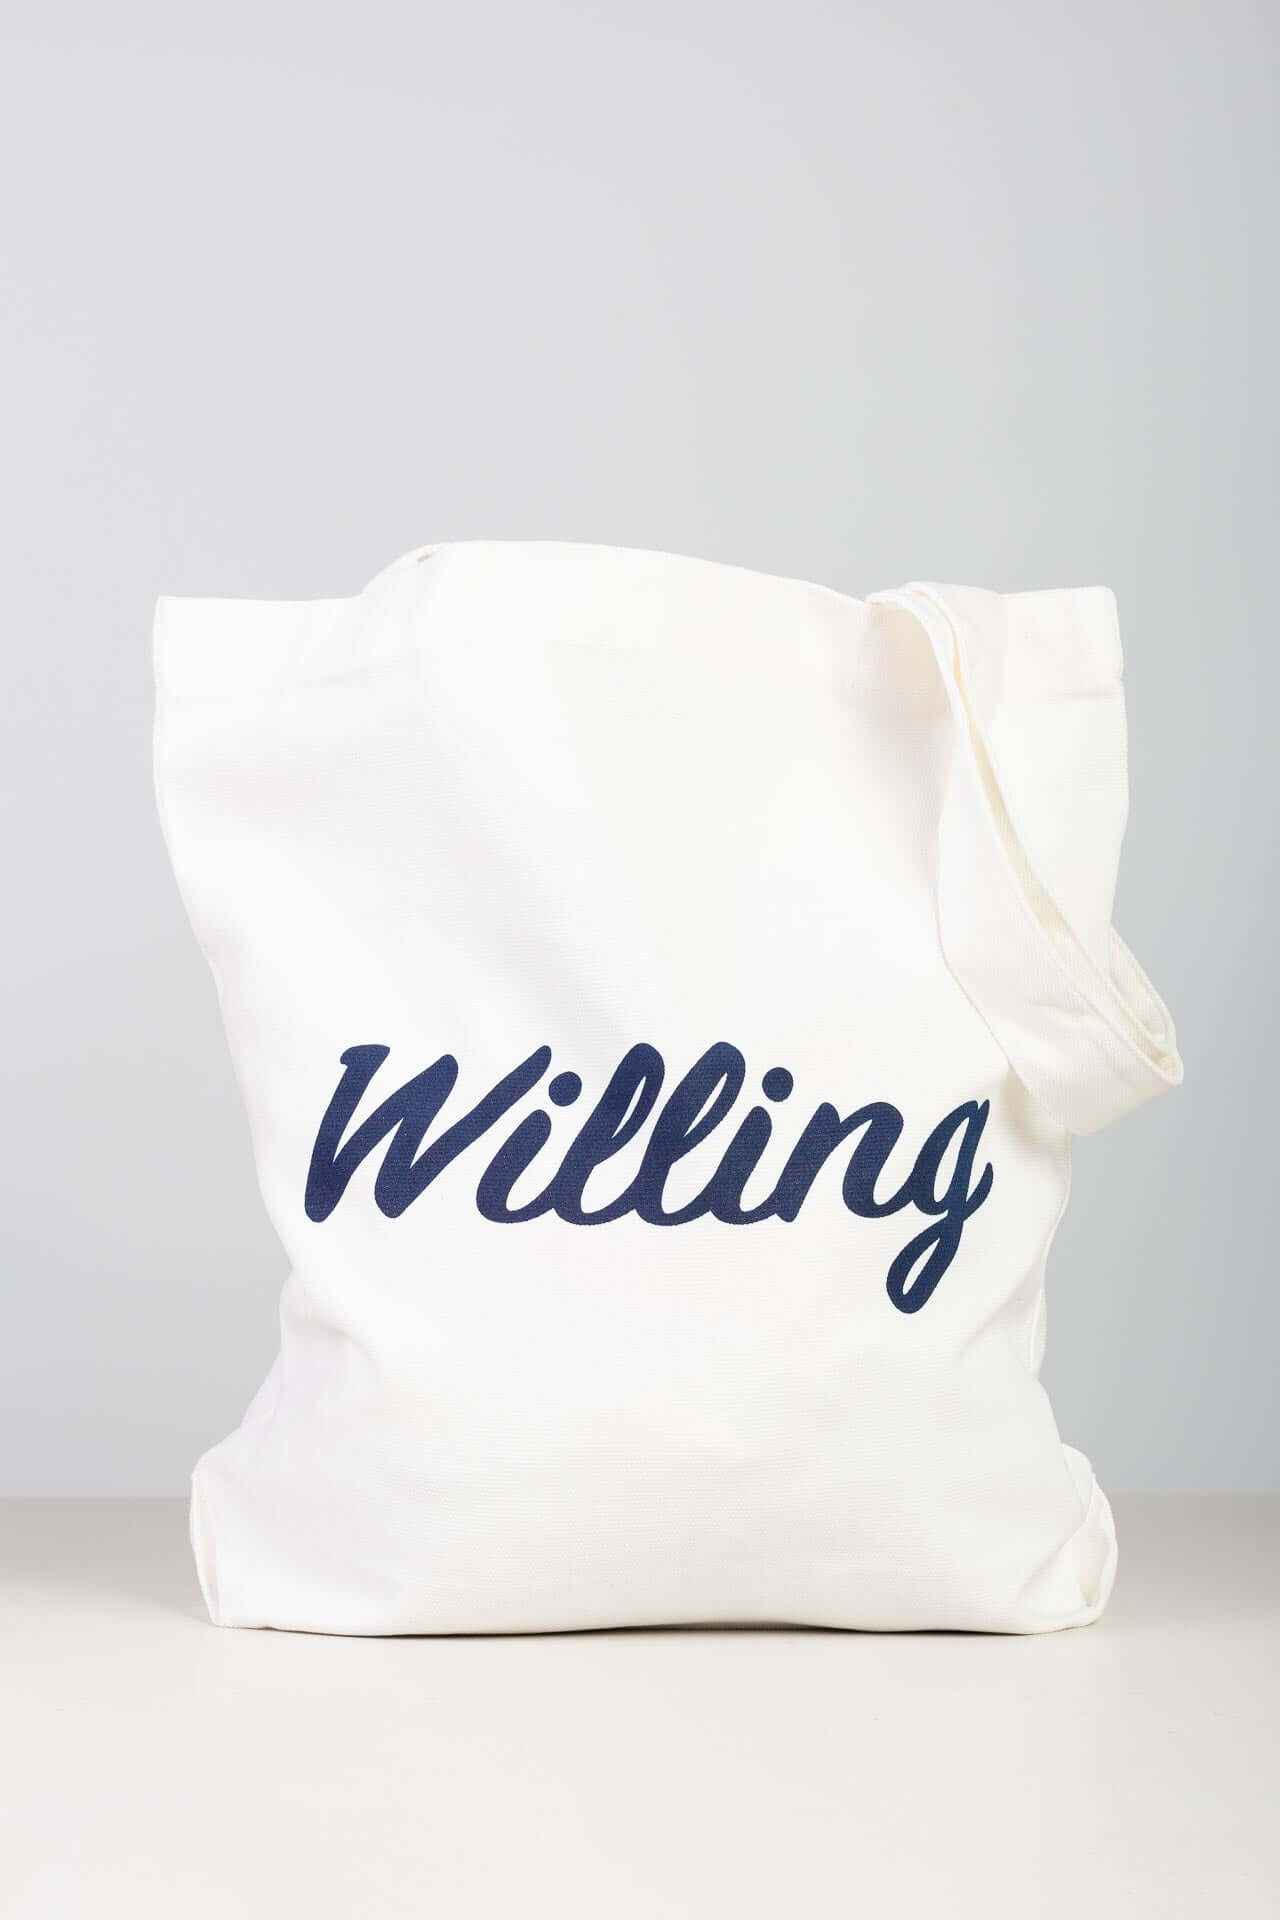 Willing Coffee White Canvas Tote Bag - Carry your favorite brews with eco-friendly flair. Stylish and sustainable for everyday adventures! 